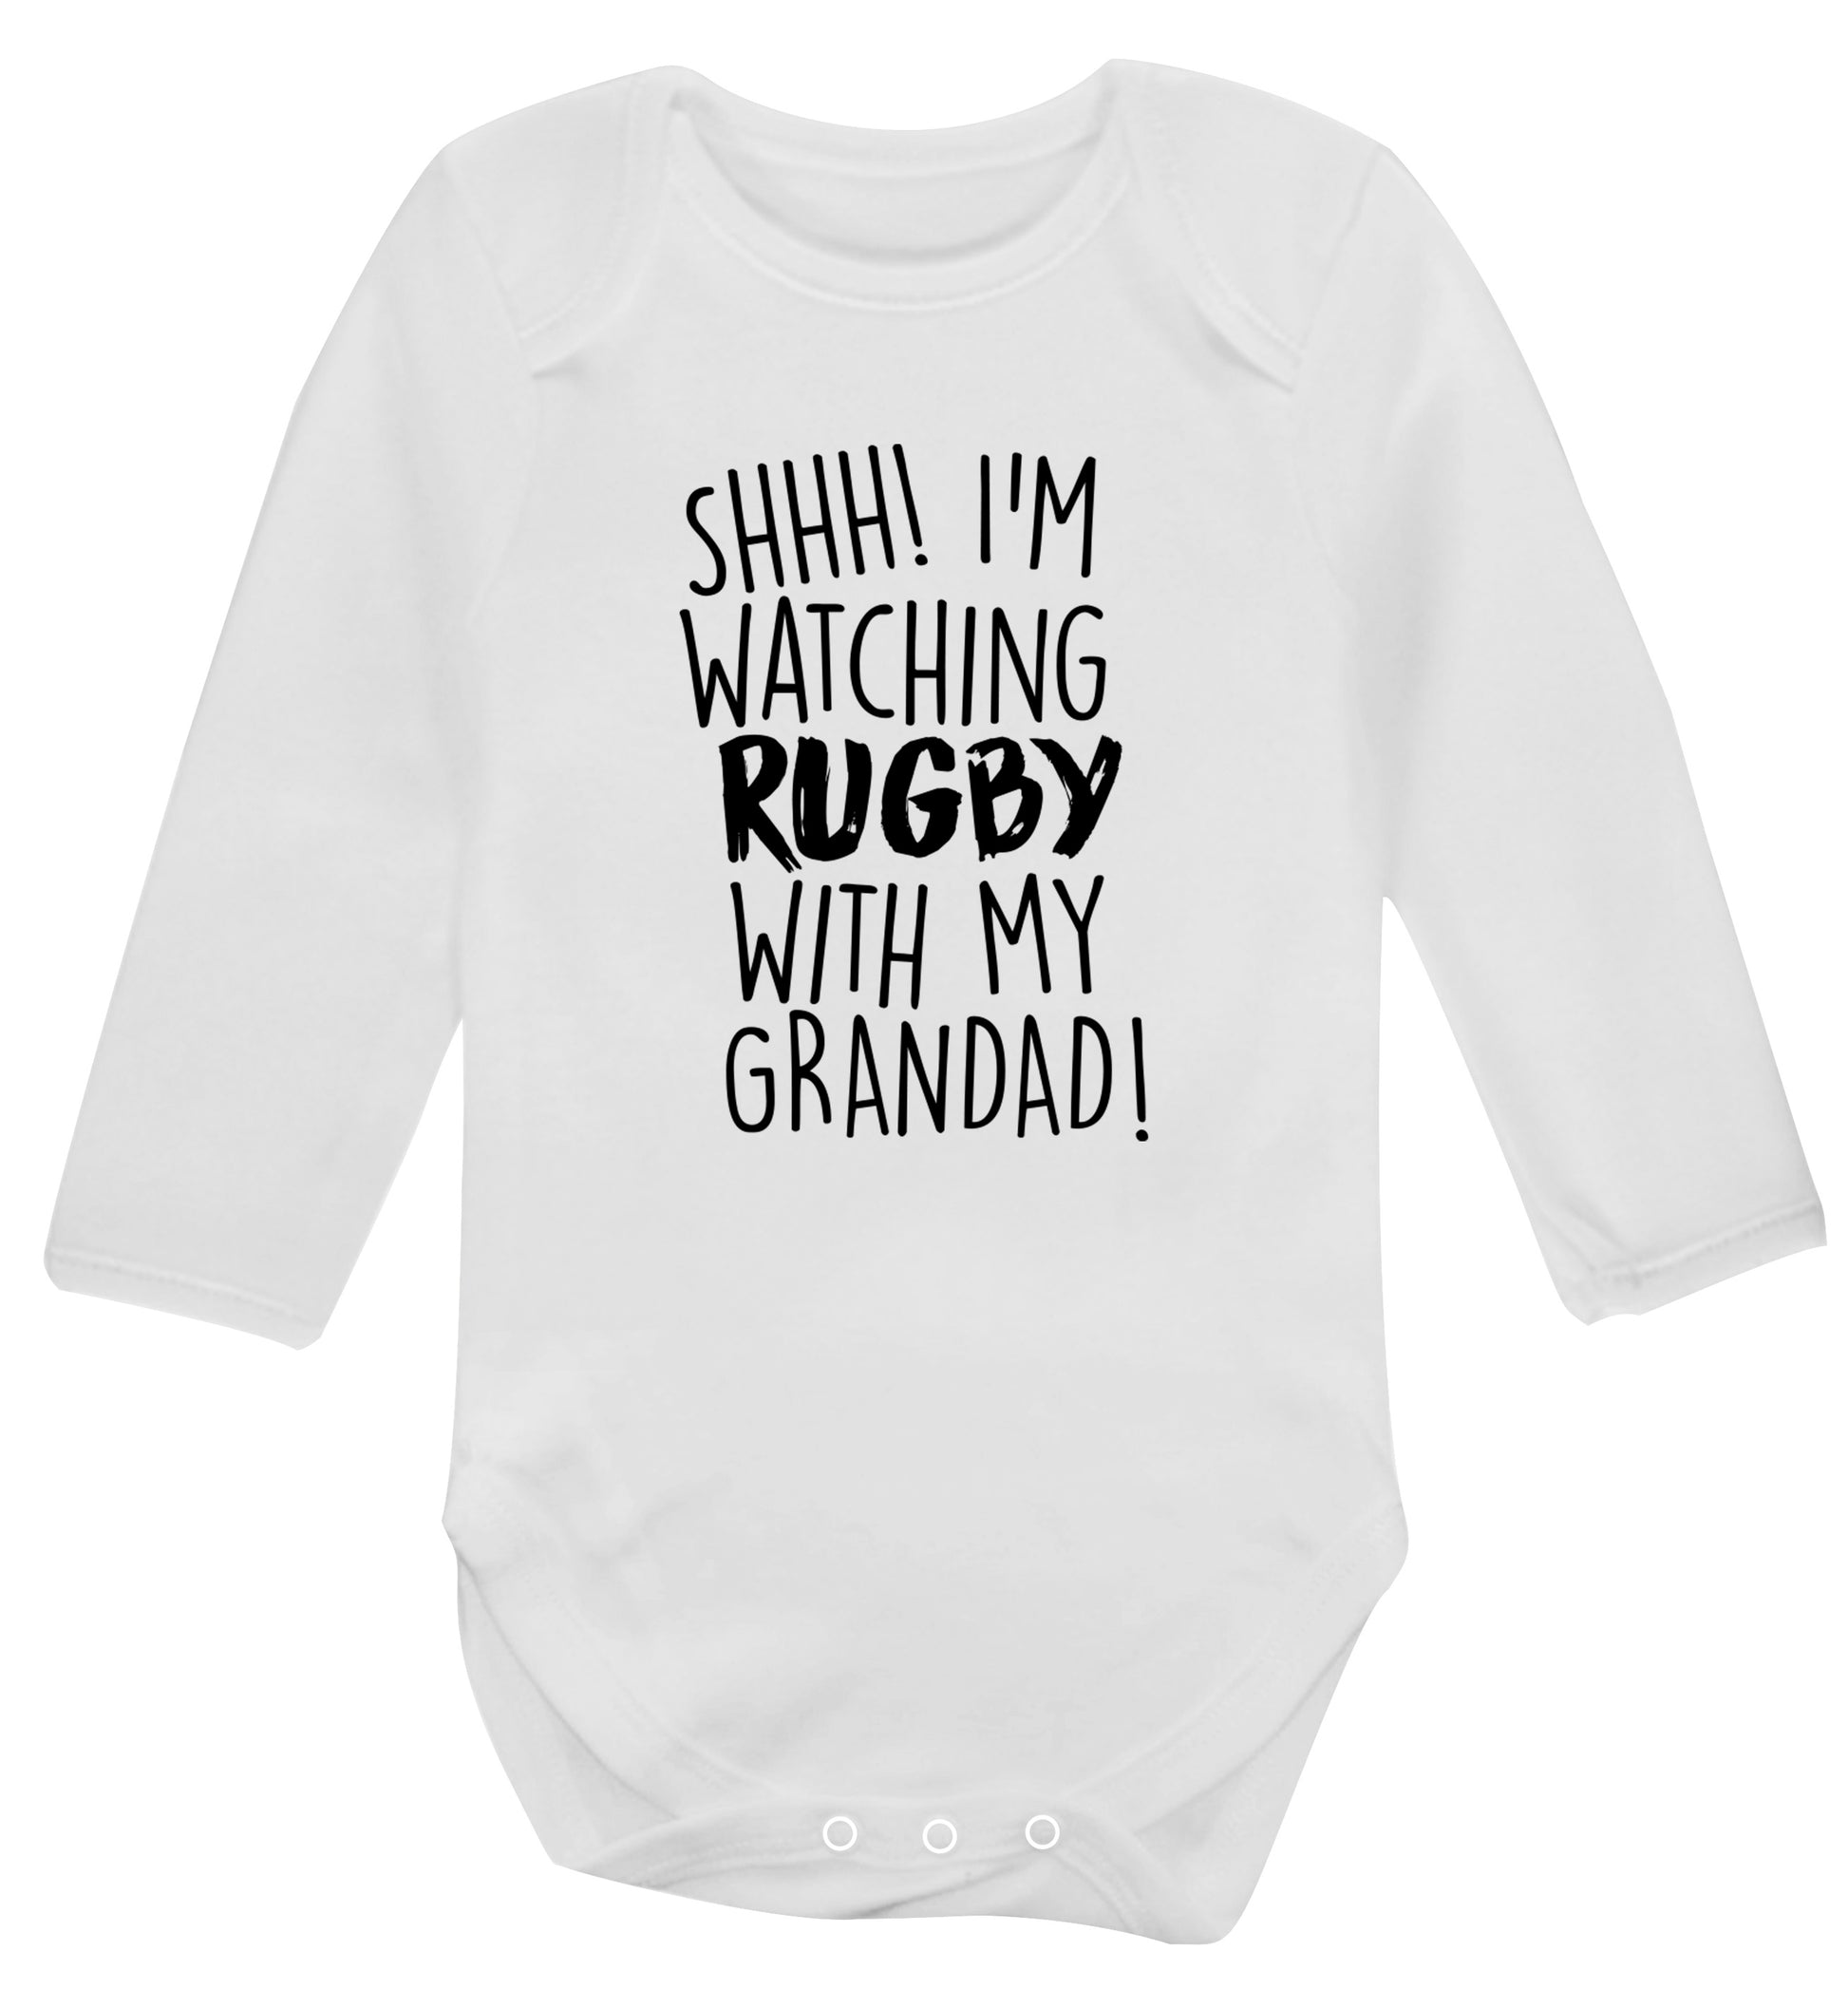 Shh I'm watching rugby with my grandad Baby Vest long sleeved white 6-12 months